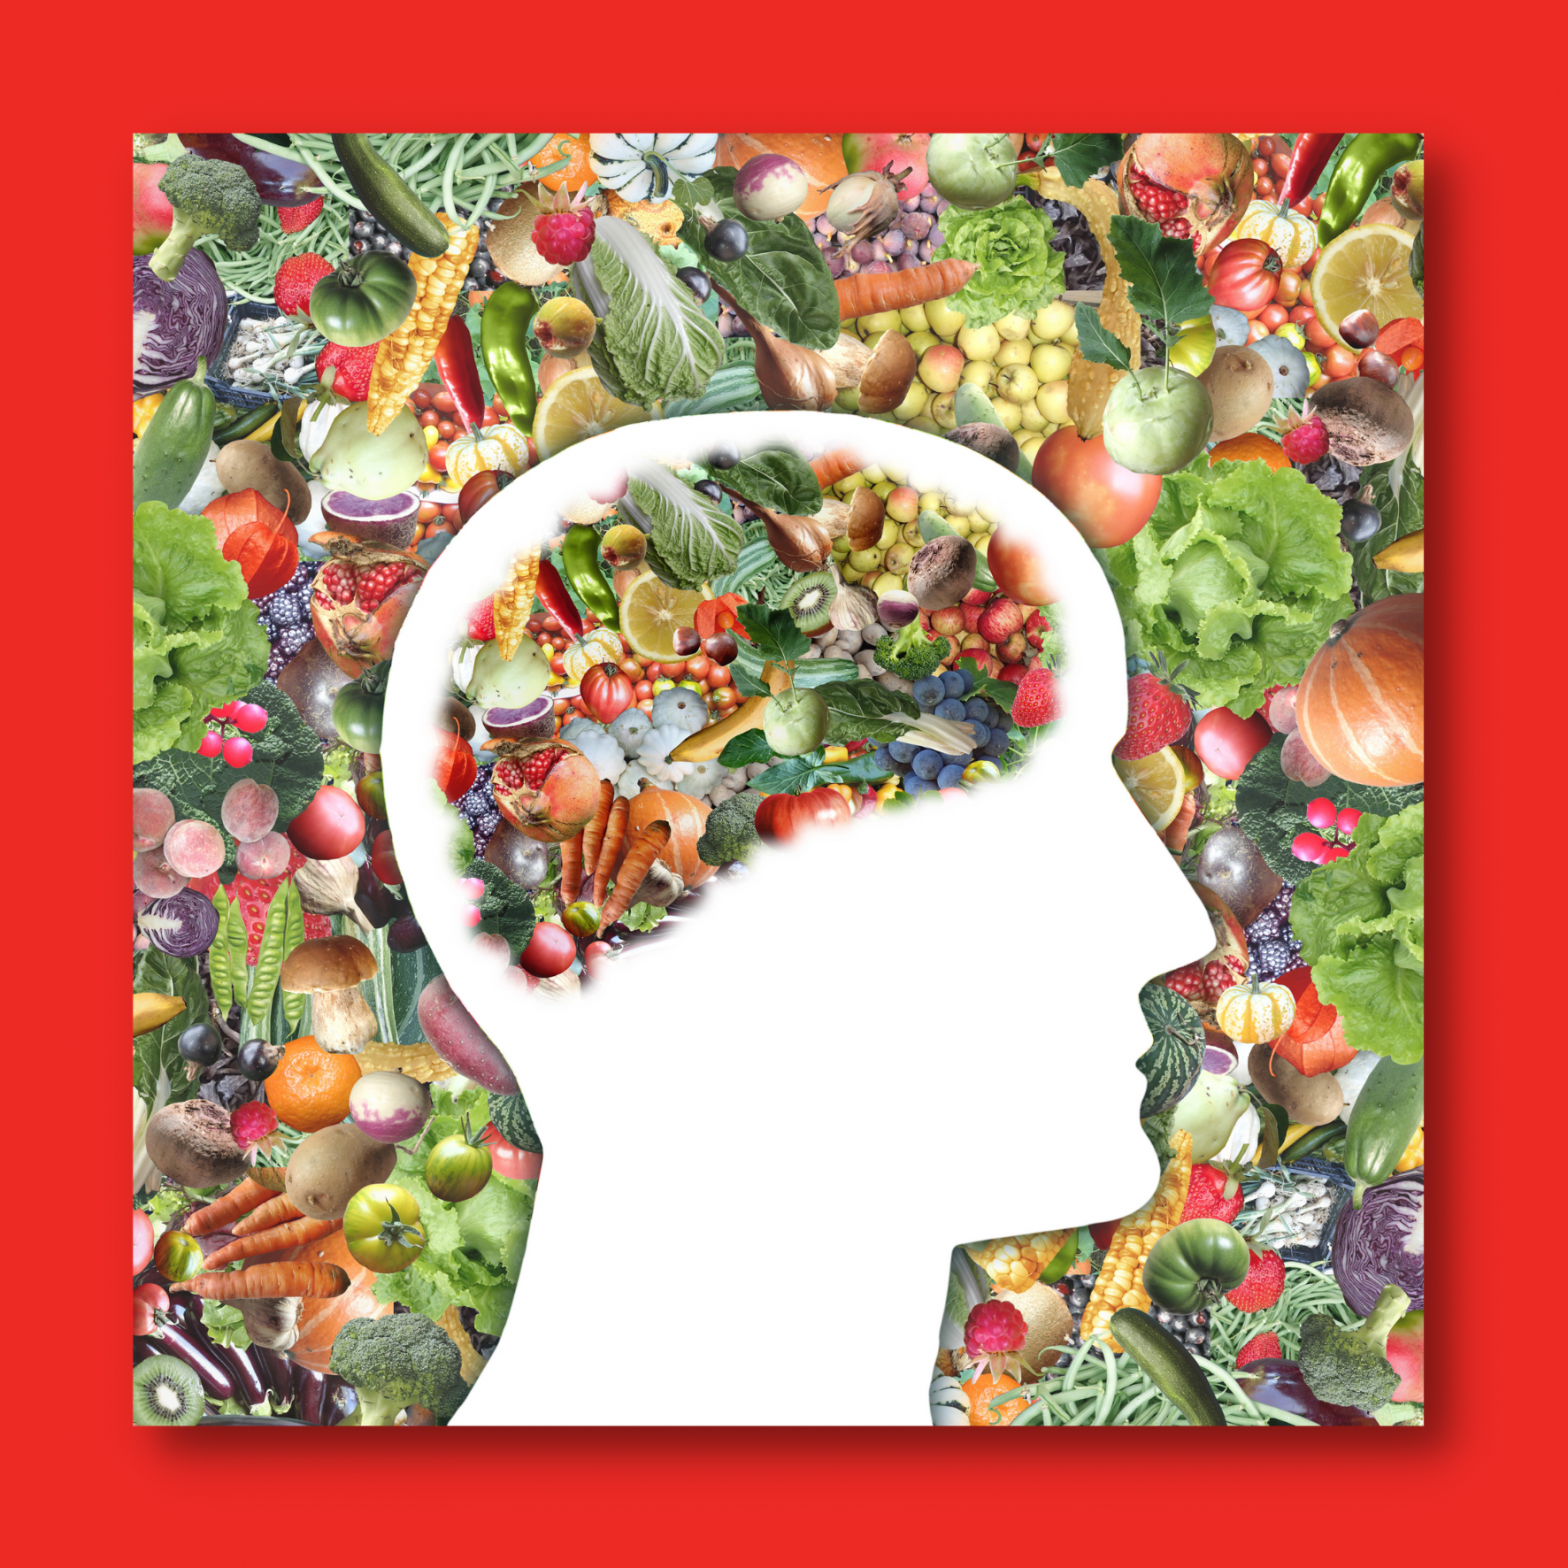 Learn about five different ways to support overall brain health and well-being. From diet to exercise, these tips will help keep your mind sharp!